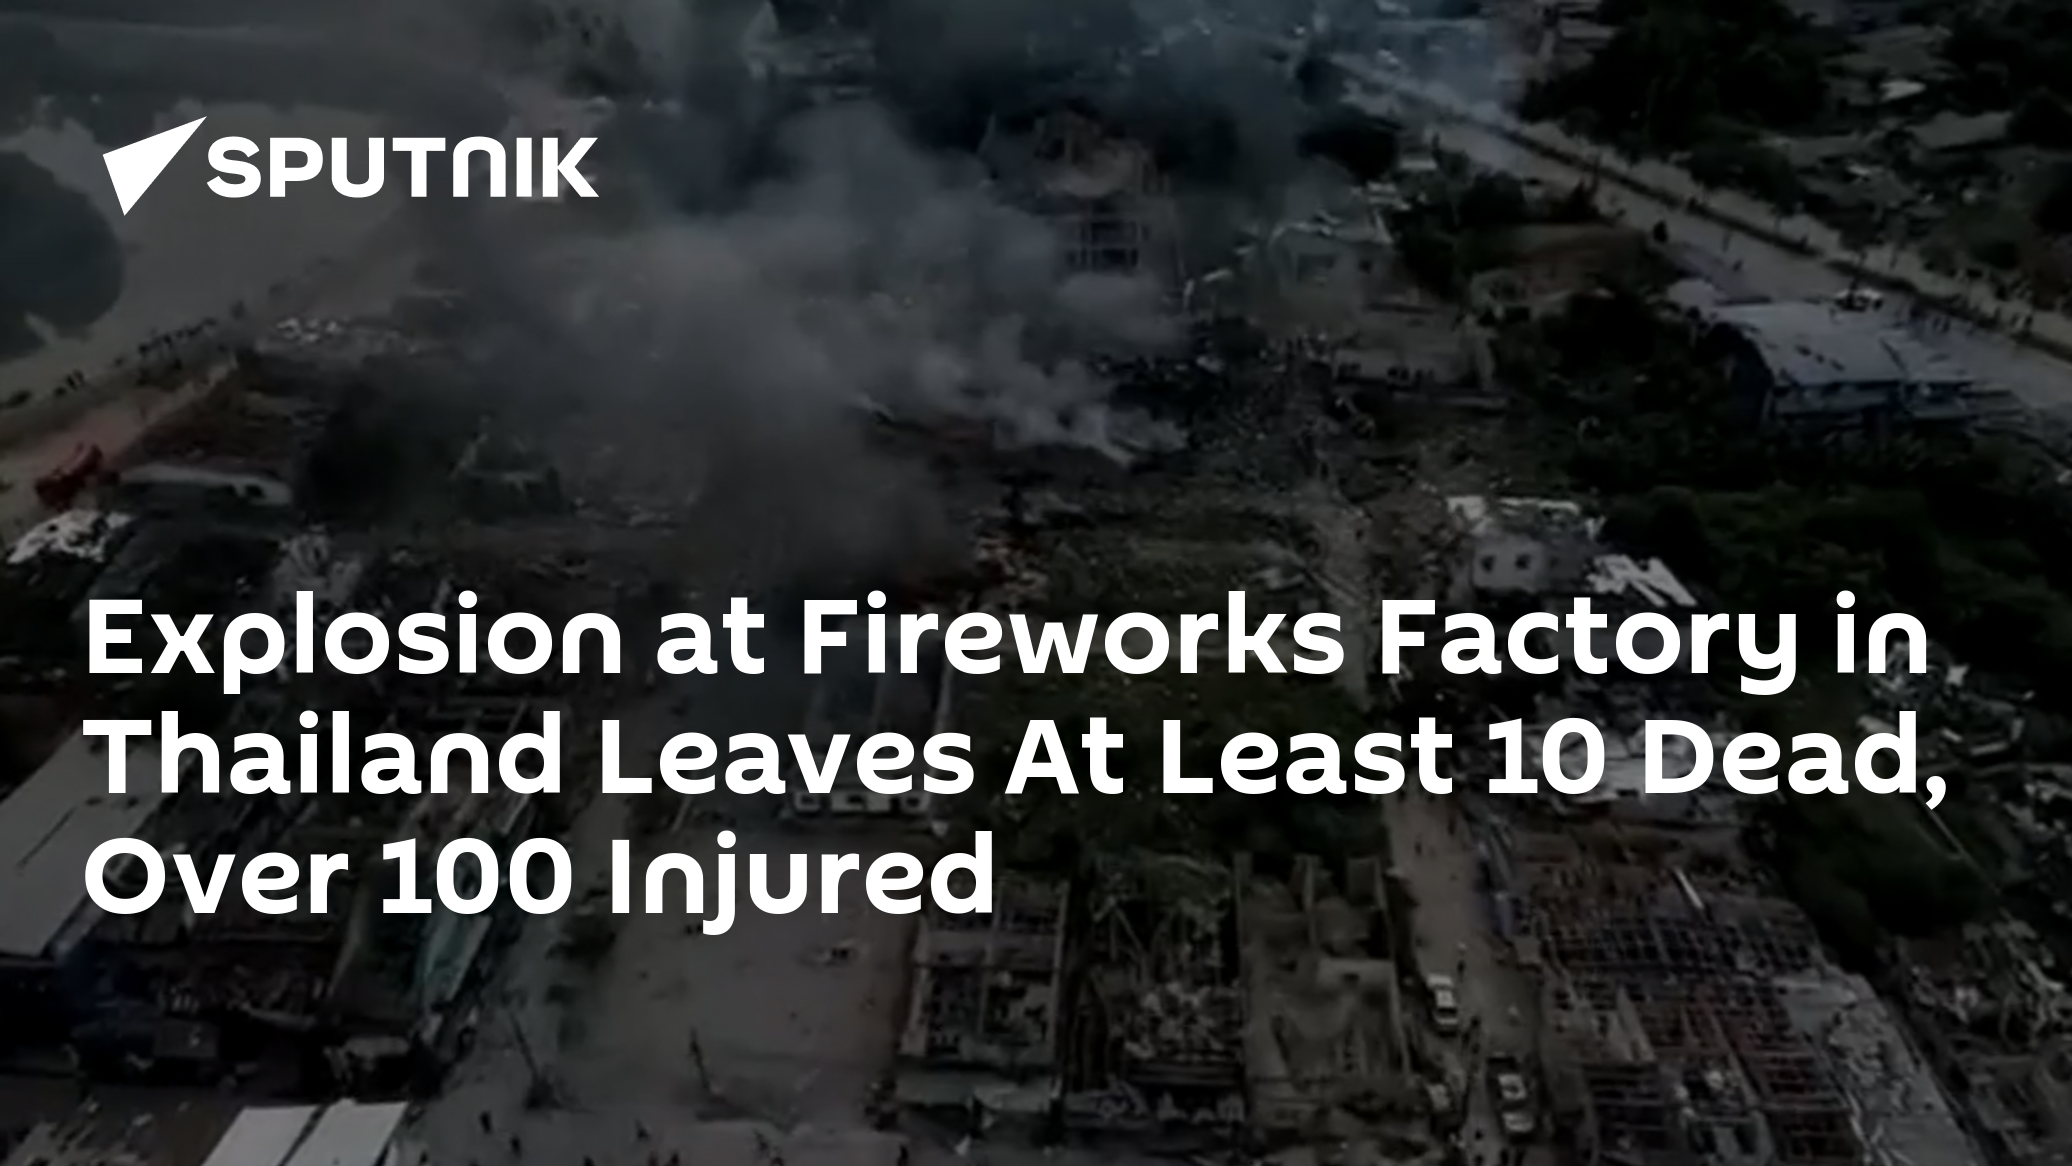 Explosion at Fireworks Factory in Thailand Leaves At Least 10 Dead, Over 100 Injured